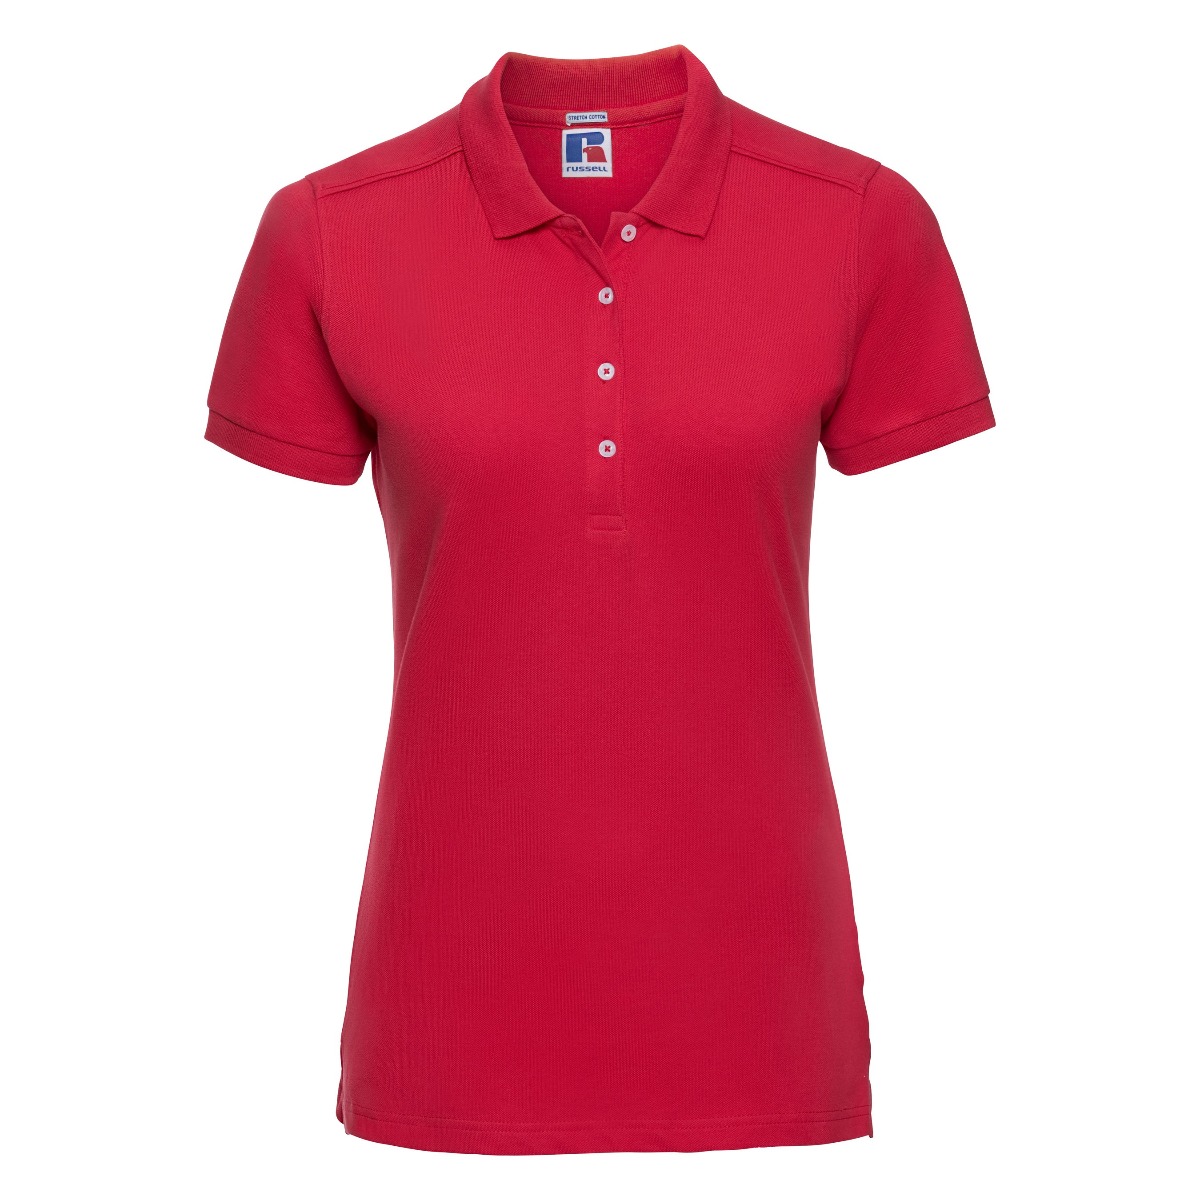 ax-httpswebsystems.s3.amazonaws.comtmp_for_downloadrussell-womens-stretch-classic-red_4.jpg